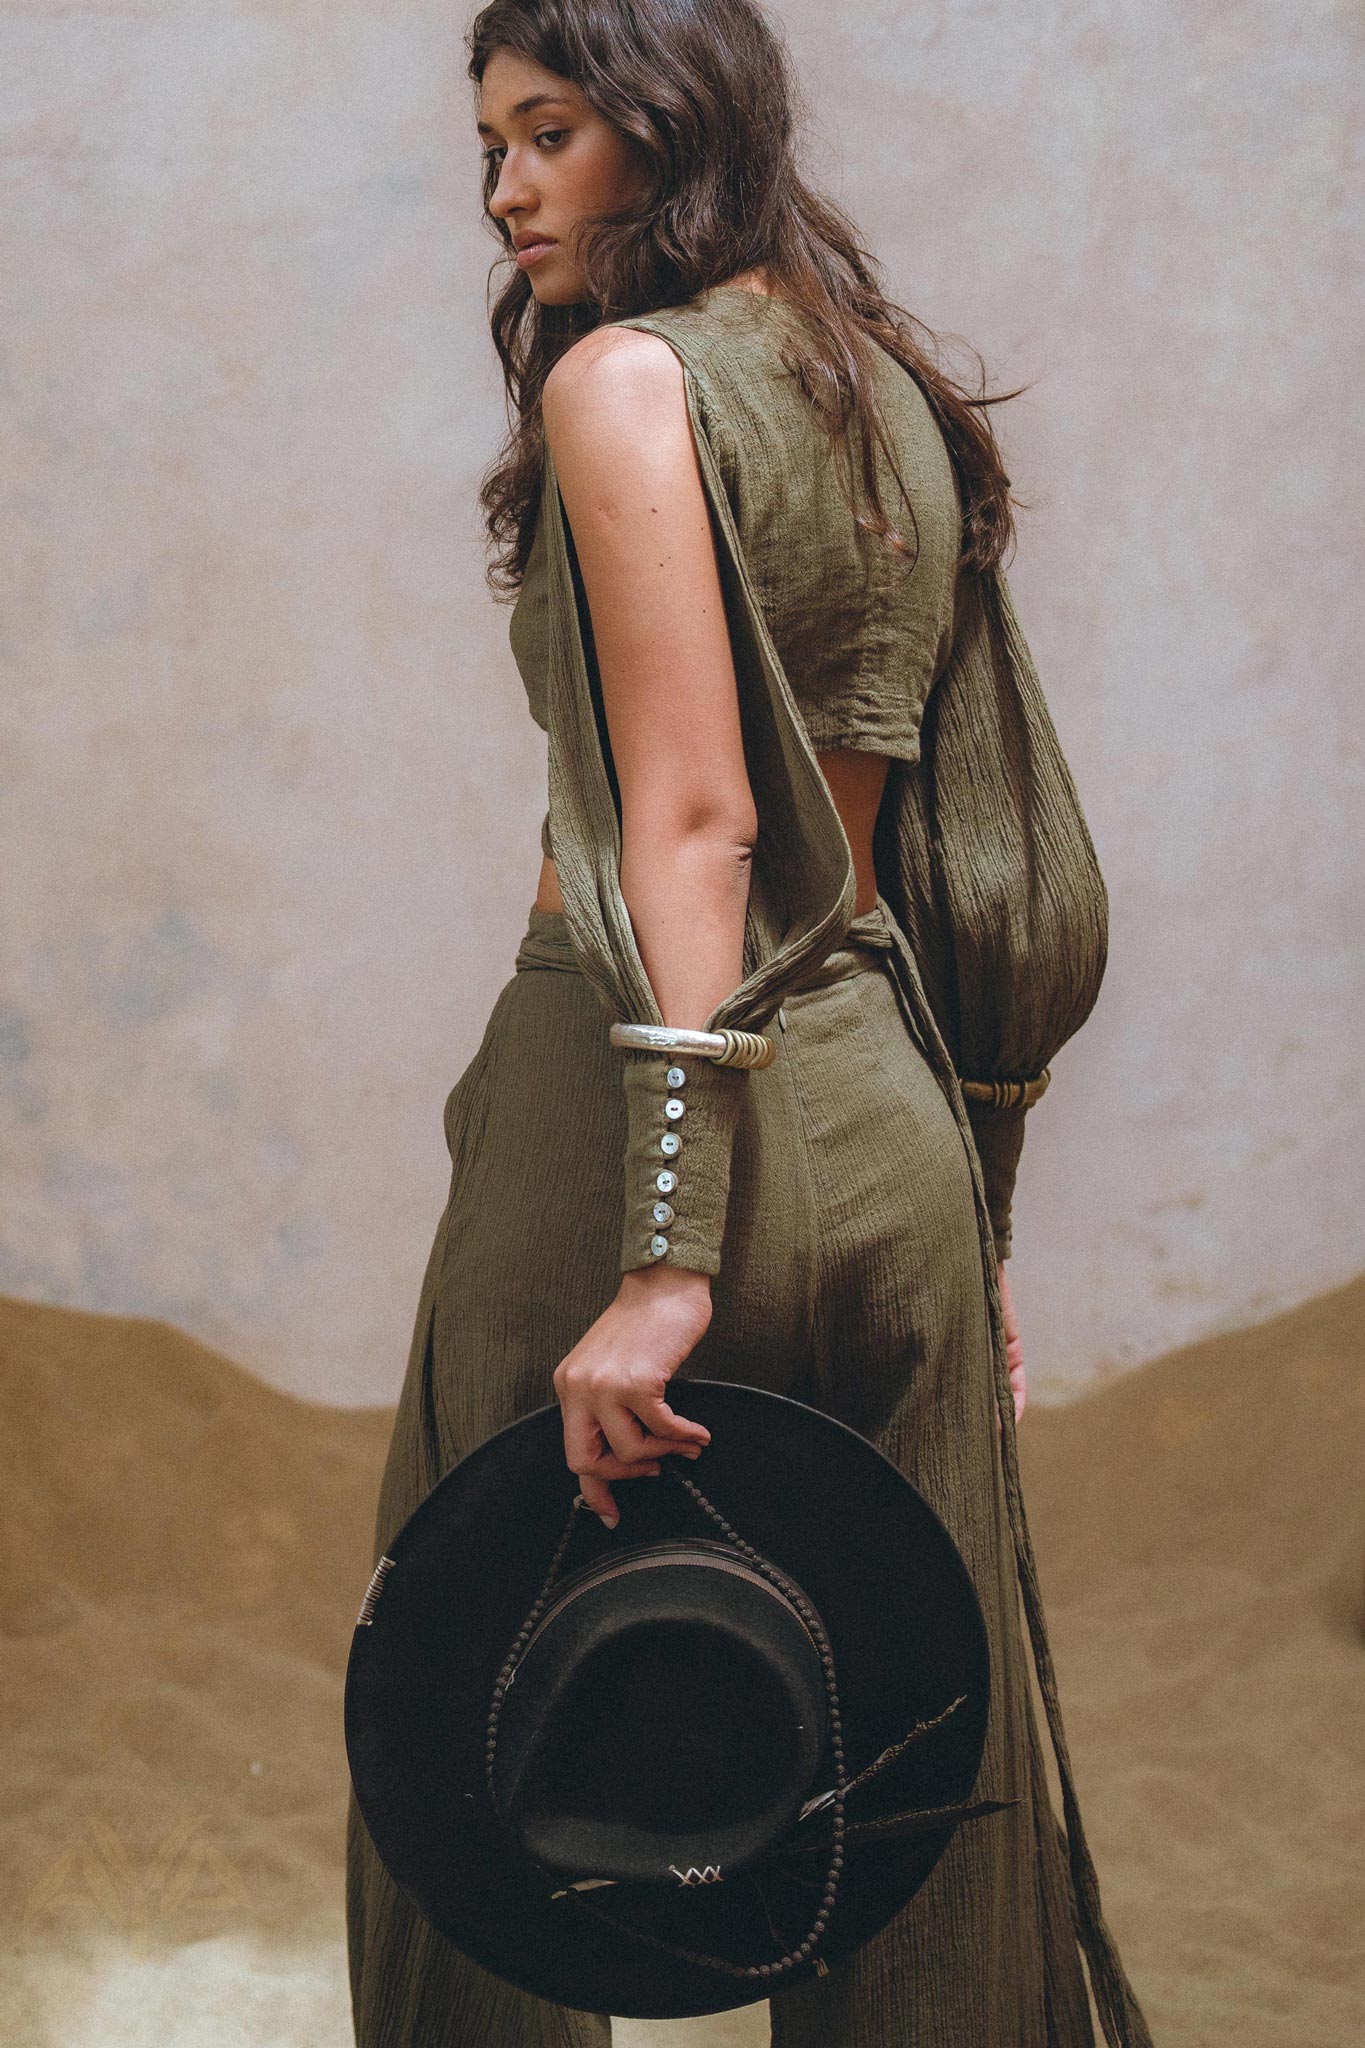 Find your unique style with Aya Sacred Wear's Sage Green Boho Crop Top and Pants.